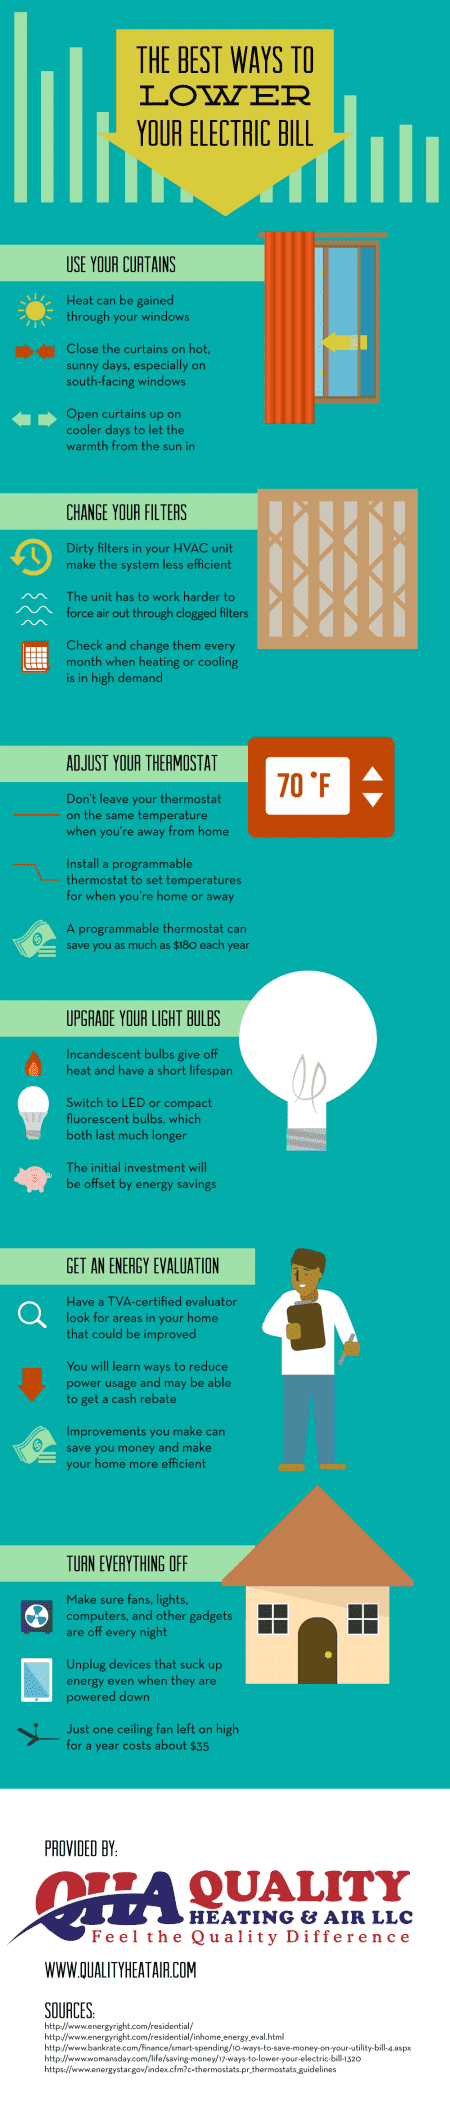 The Best Ways To Lower Your Electric Bill Infographic